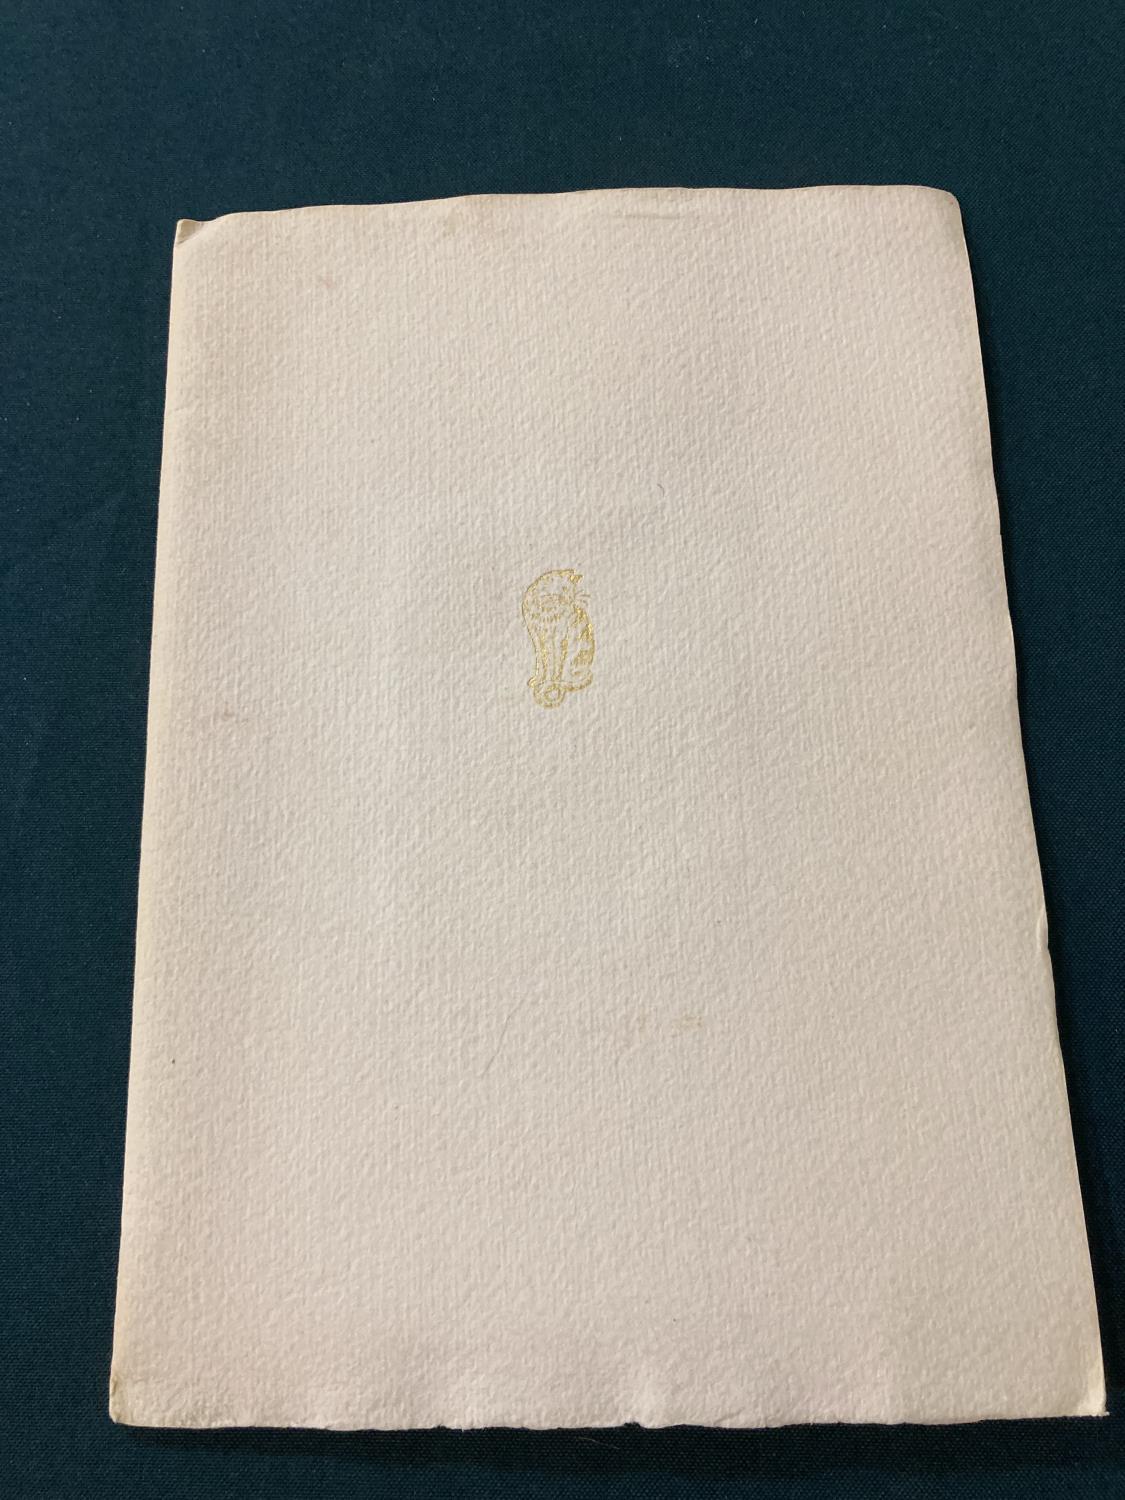 Sassoon, Siegfried. An Octave, number 9 of 350 copies, signed by the author, portrait - Image 5 of 8